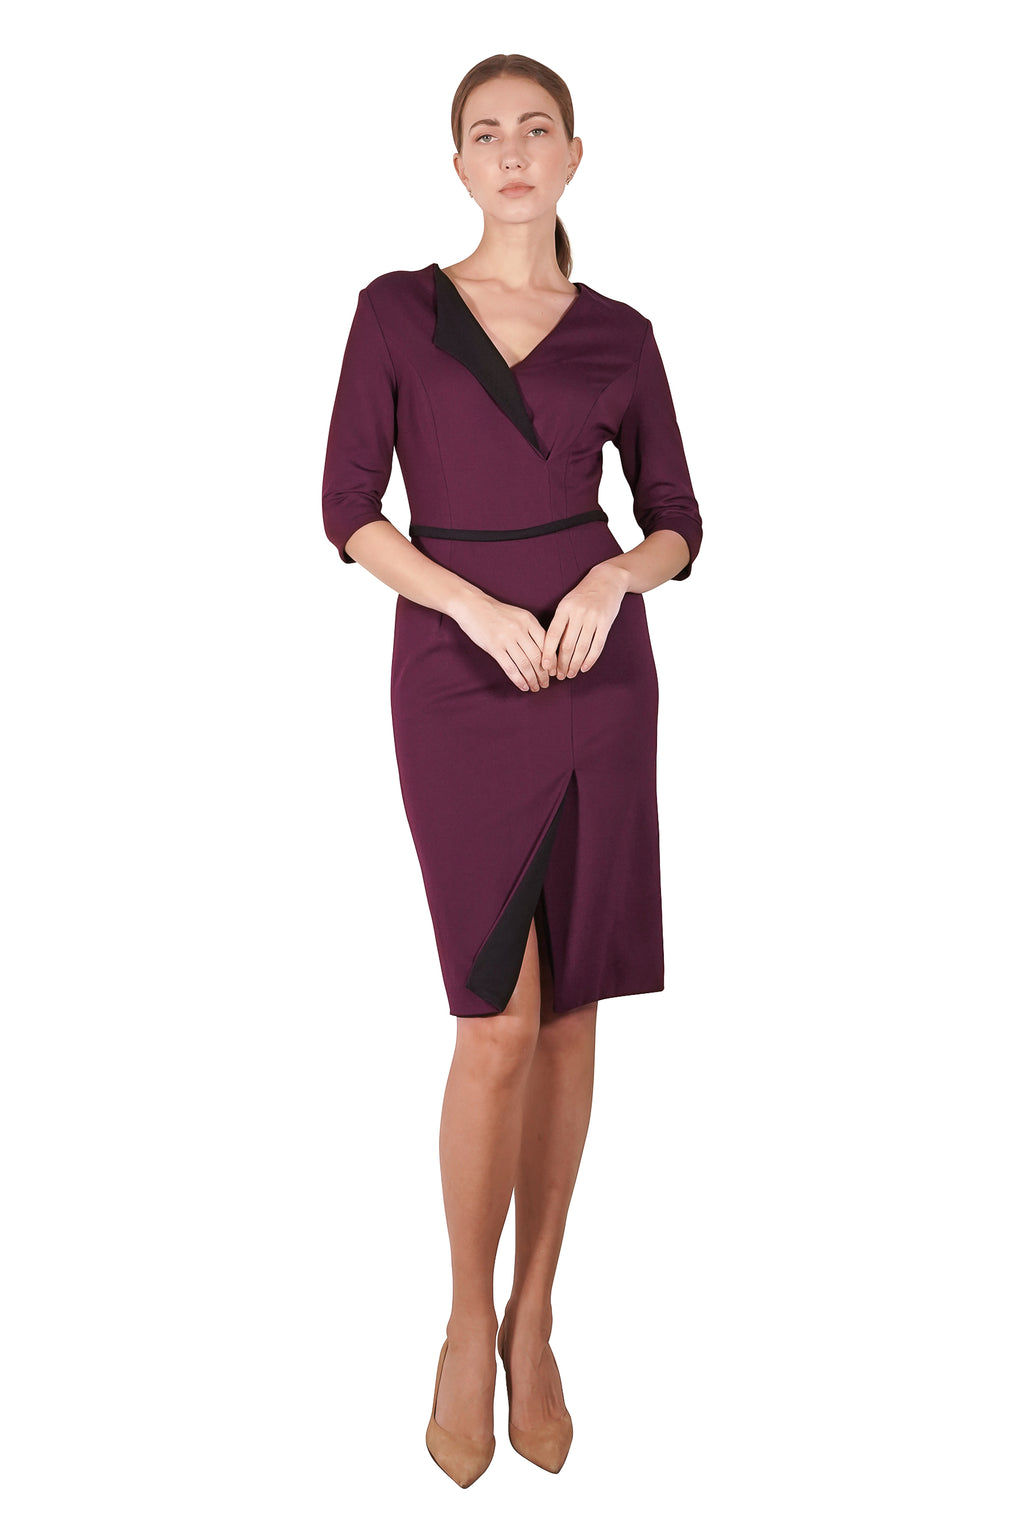 Alexia 2-Toned Dress (Mid-Sleeves)